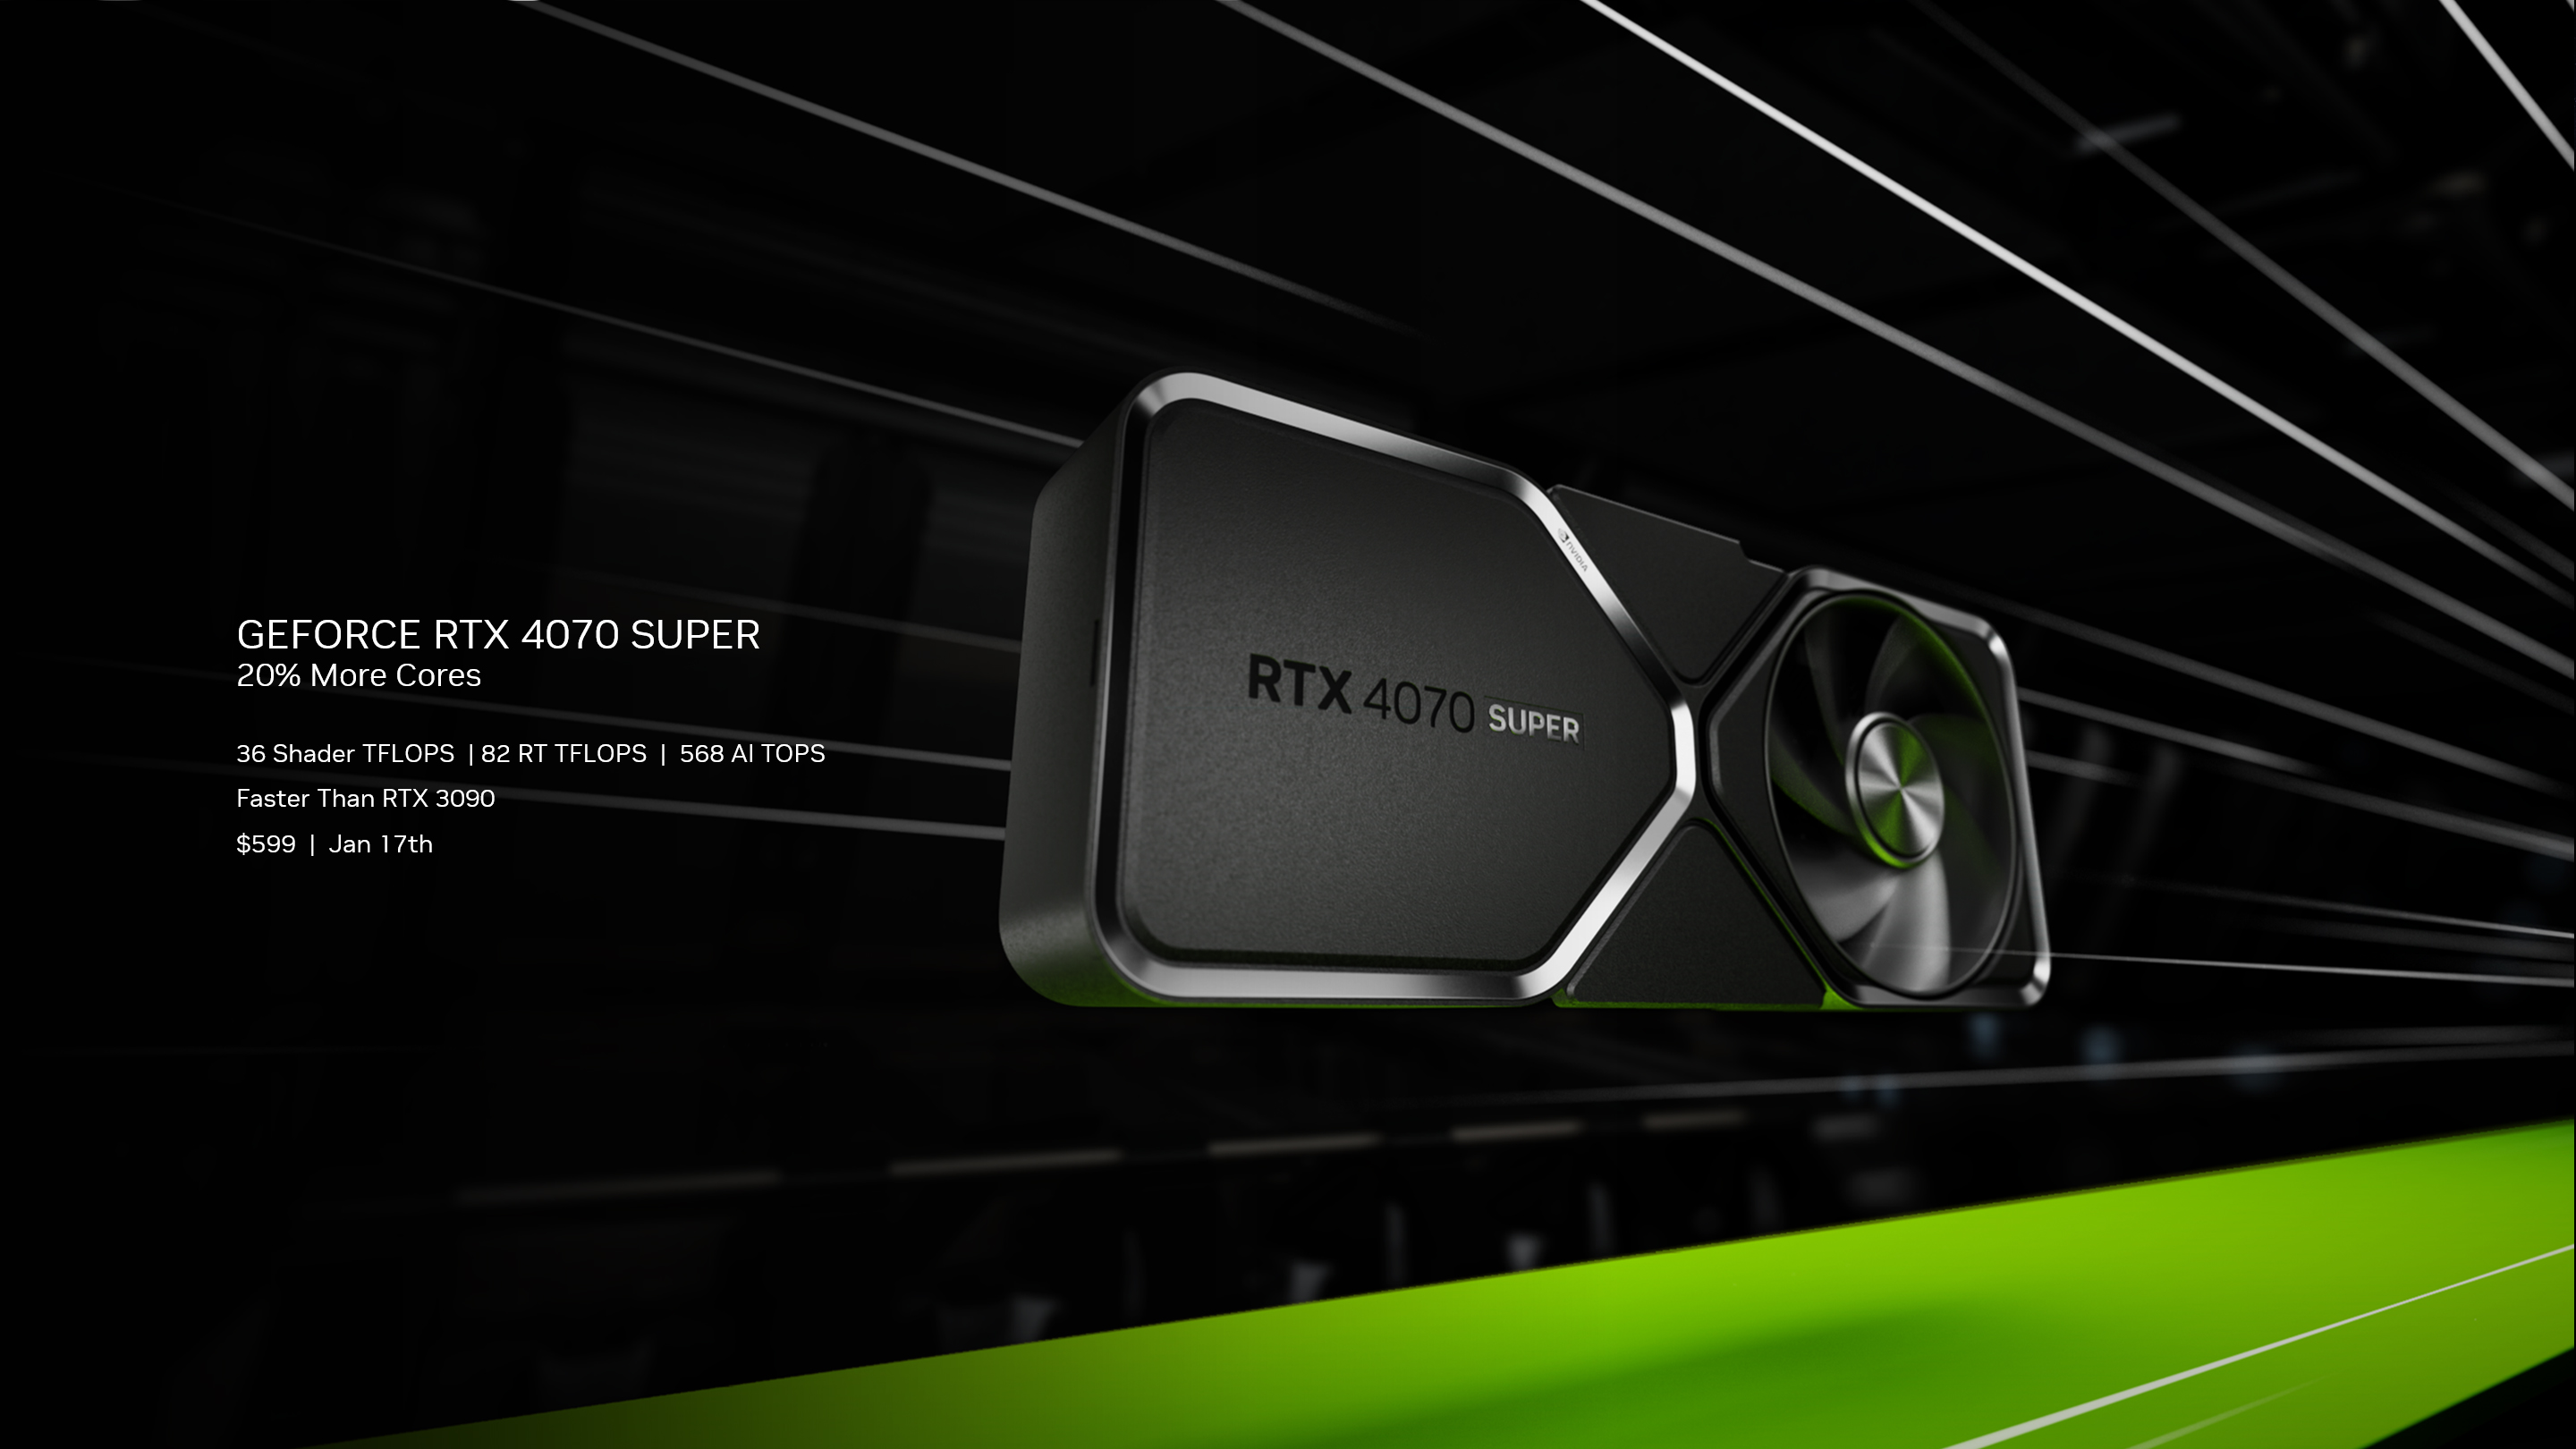 Nvidia launches GeForce RTX 40 Super series GPUs for gaming and creativity